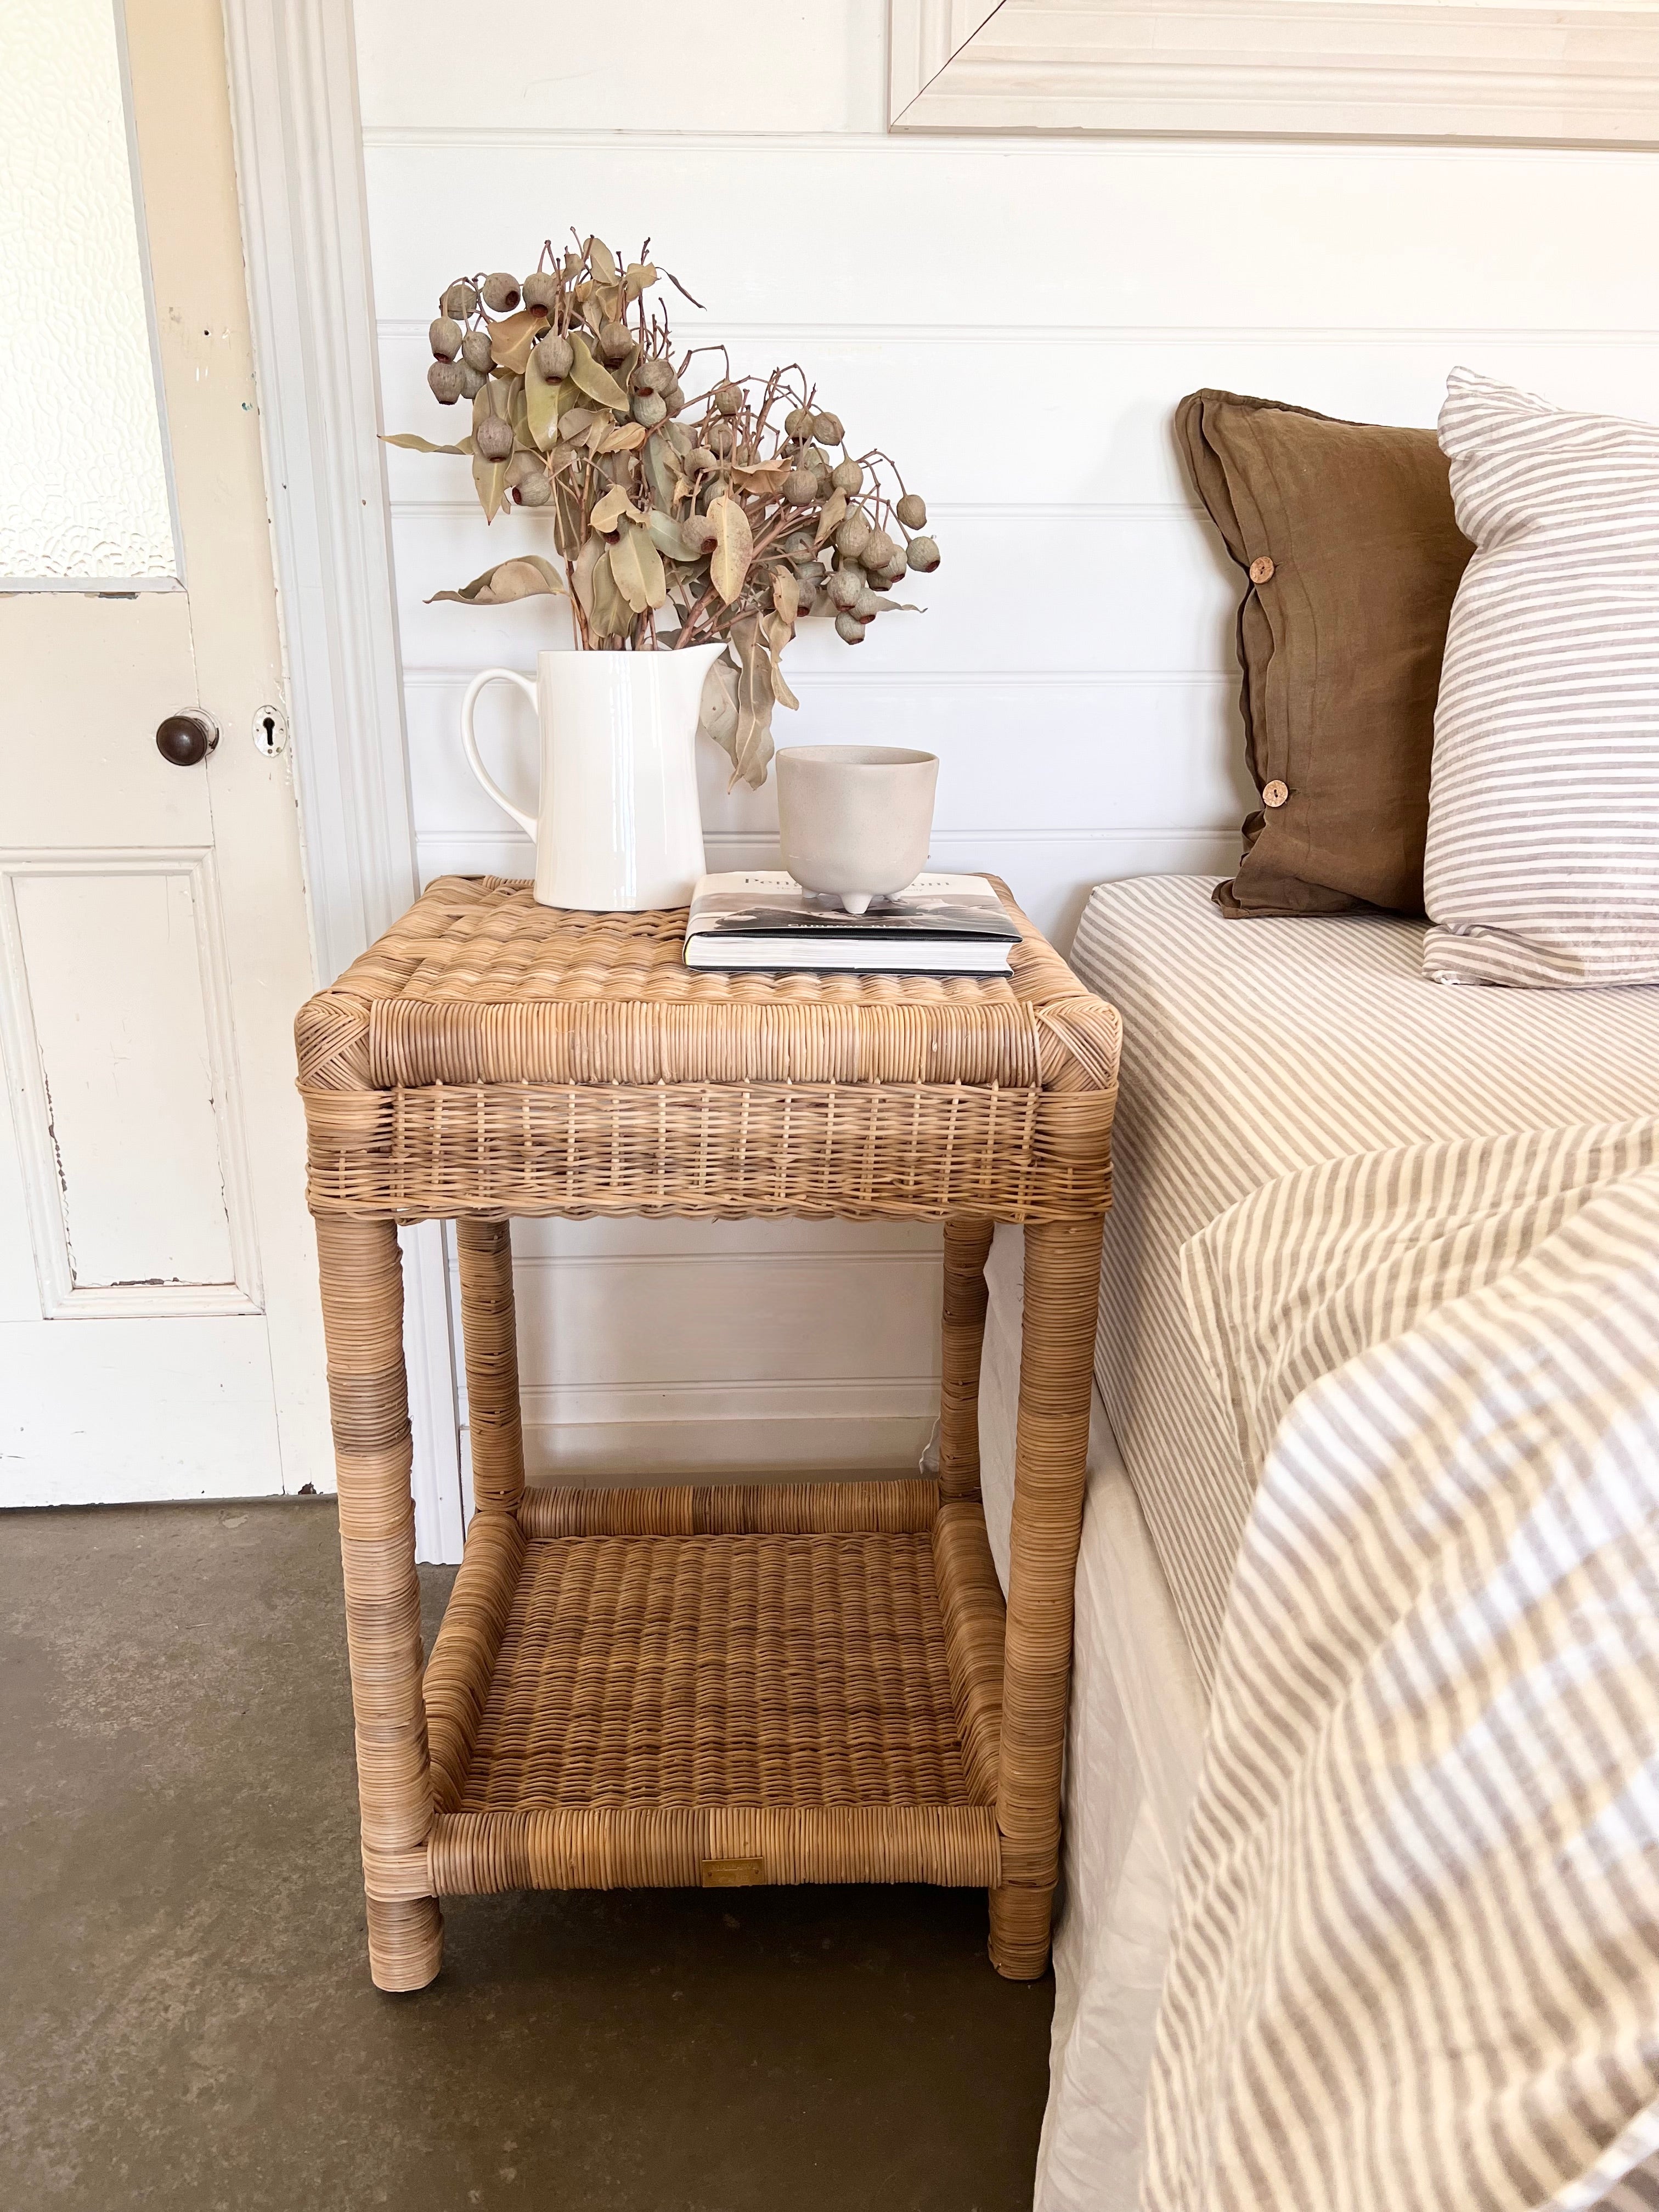 Classic Tall Woven Cane Bedside Table